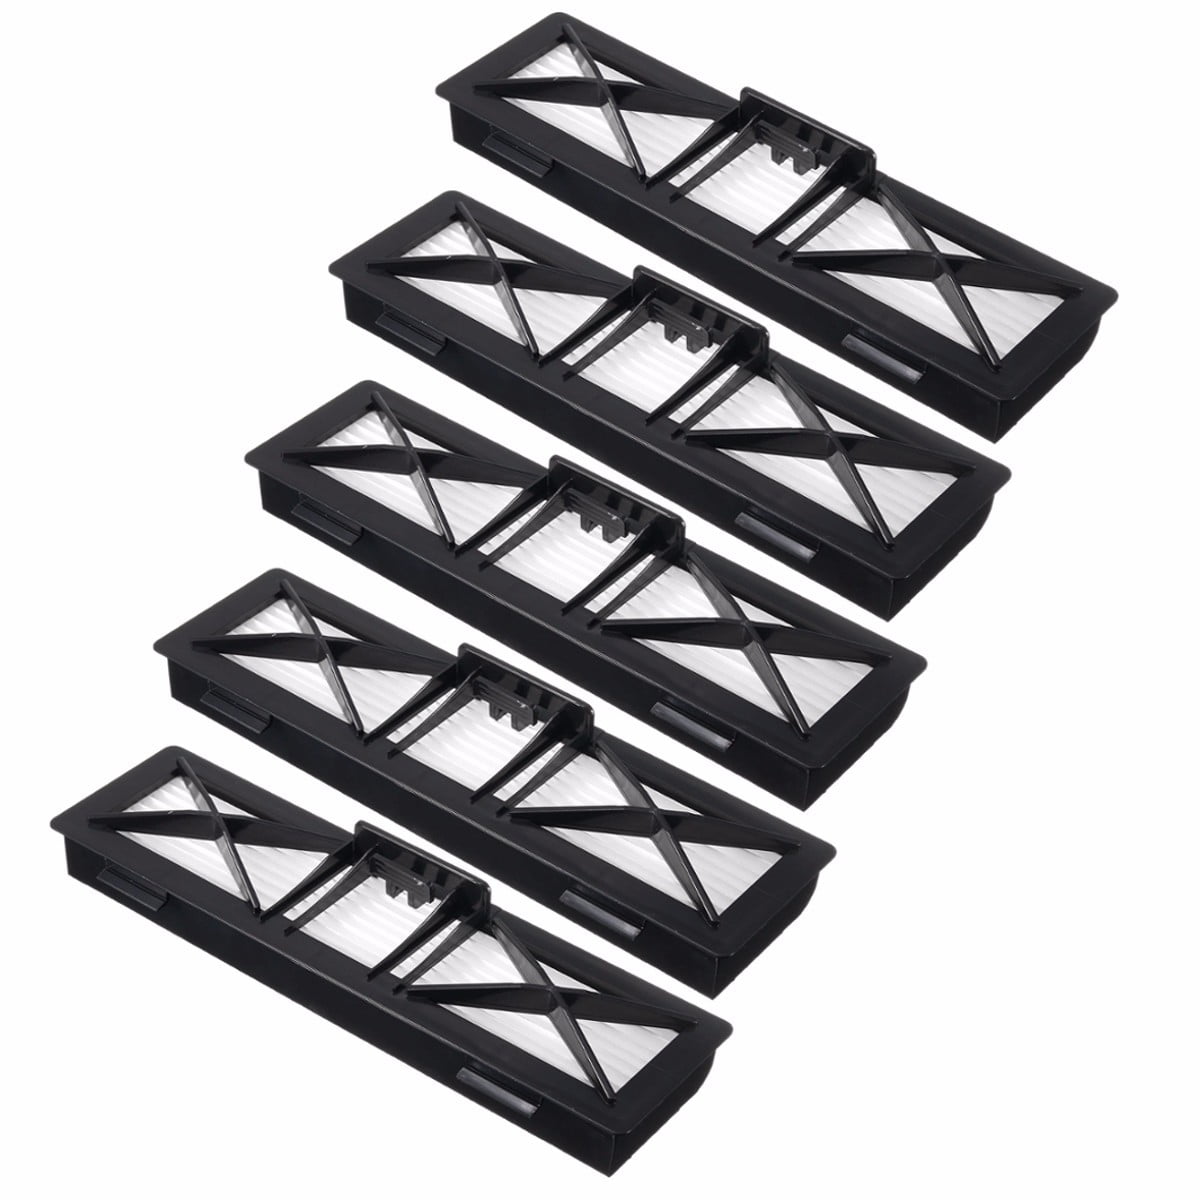 10 Pack Ultra Performance Filter for Neato Botvac Connected D Series Cleaner D70 